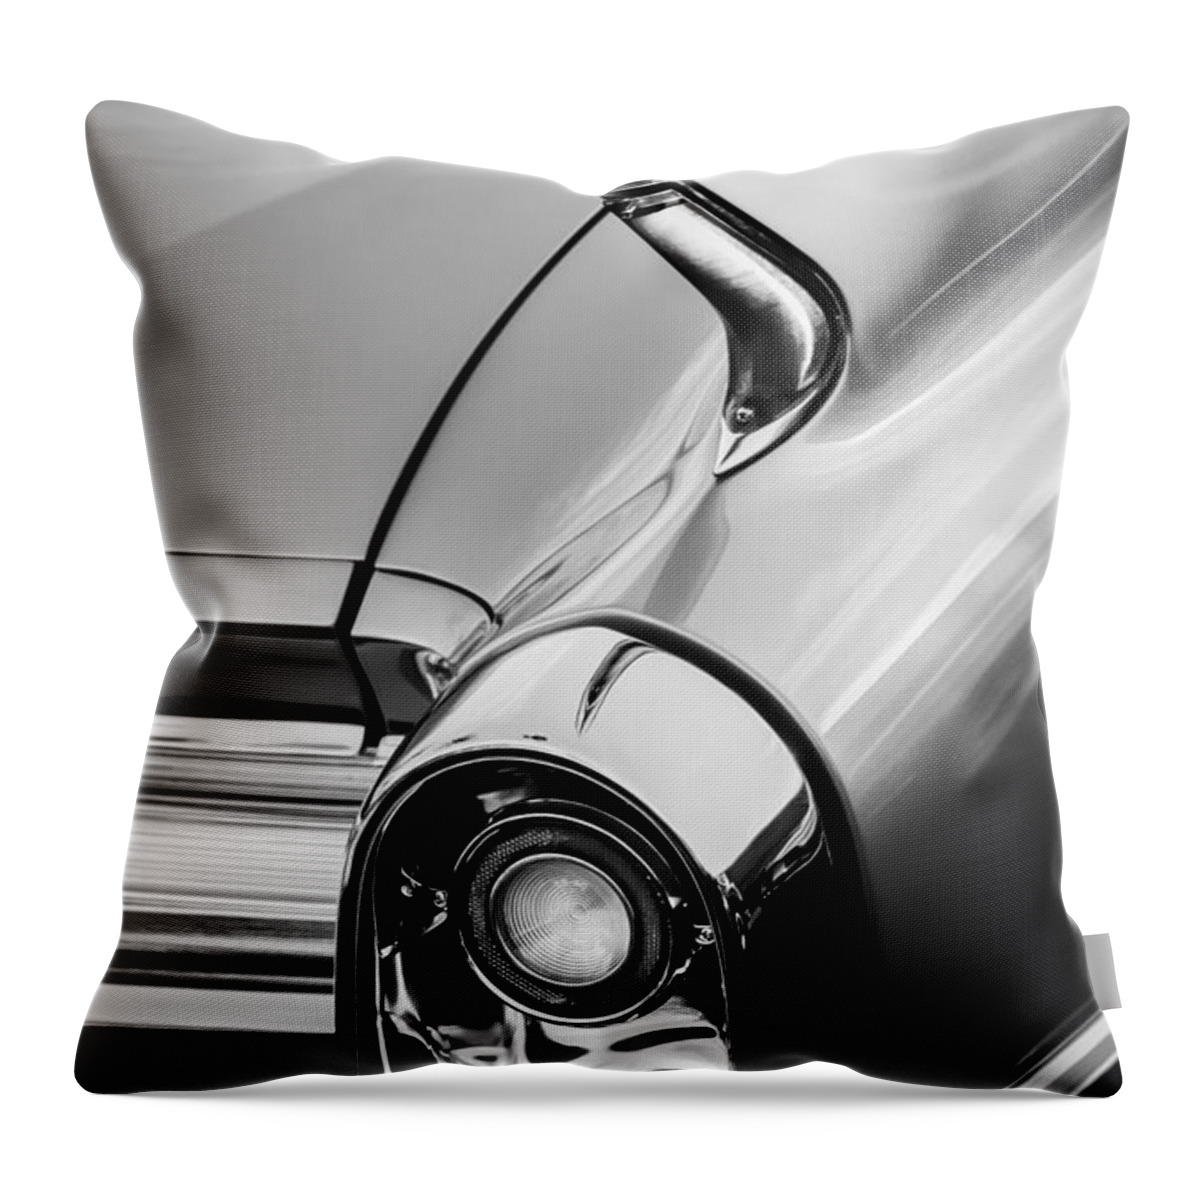 1960 Cadillac Series 62 Convertible Taillight Throw Pillow featuring the photograph 1960 Cadillac Series 62 Convertible Taillight -1040bw by Jill Reger